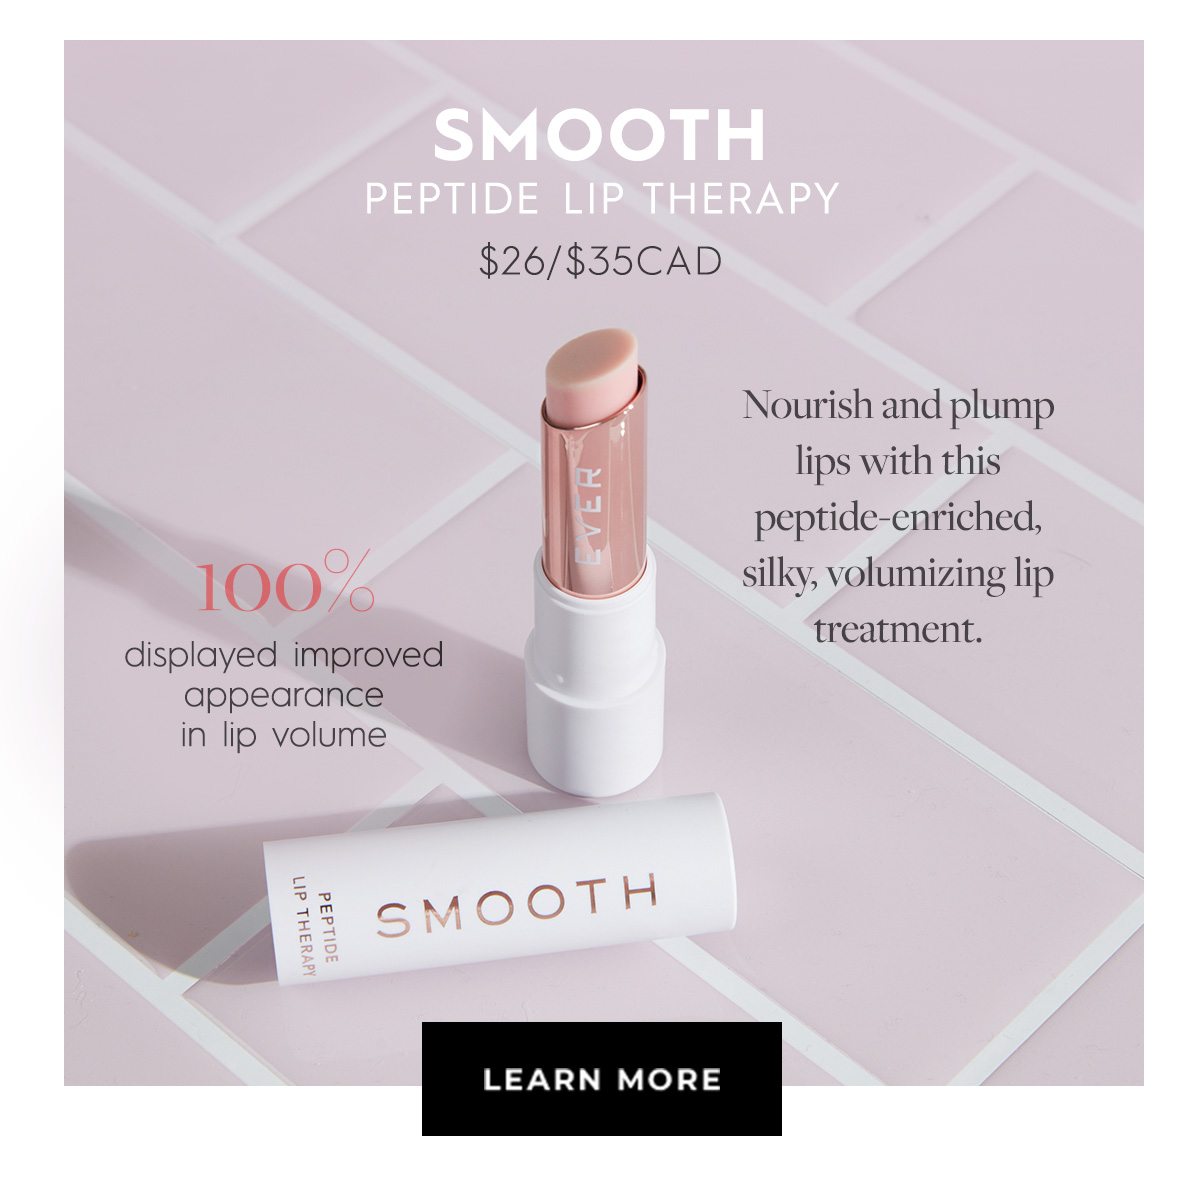 SMOOTH PEPTIDE Lip Therapy - LEARN MORE